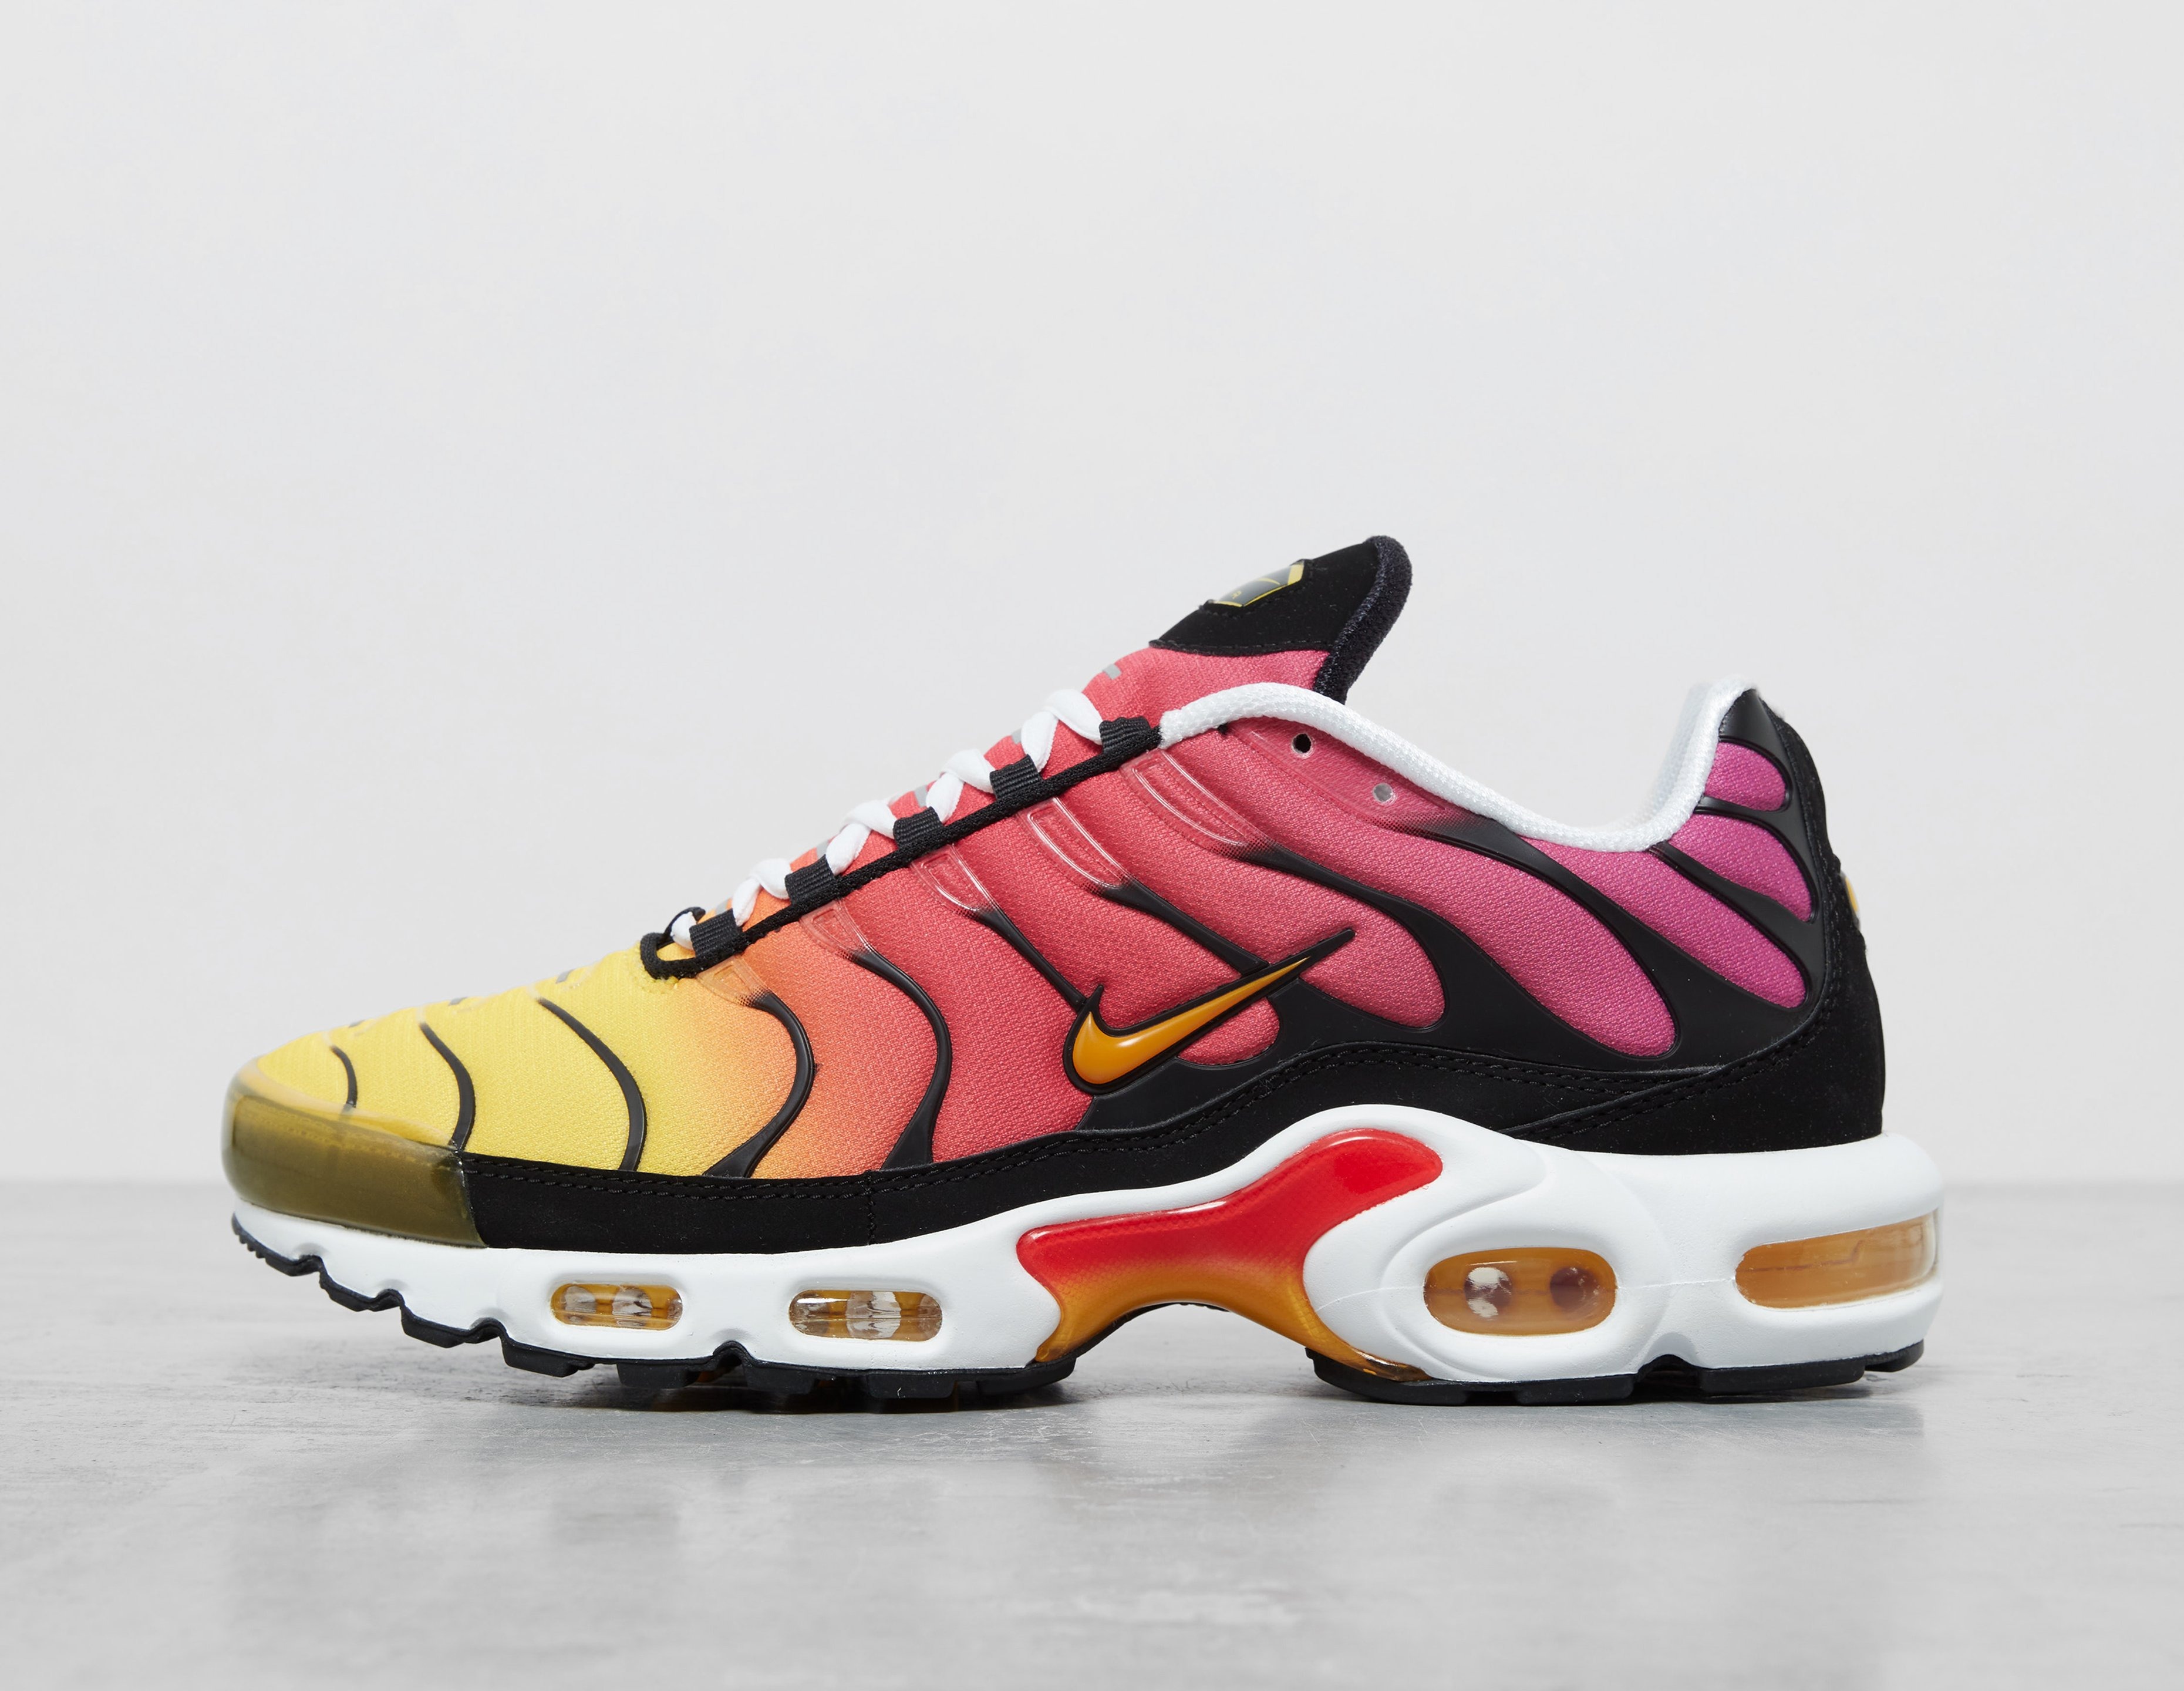 Pink Nike Air Max Plus | BellsShops | stores that sell nike dunks sale on ebay shoes